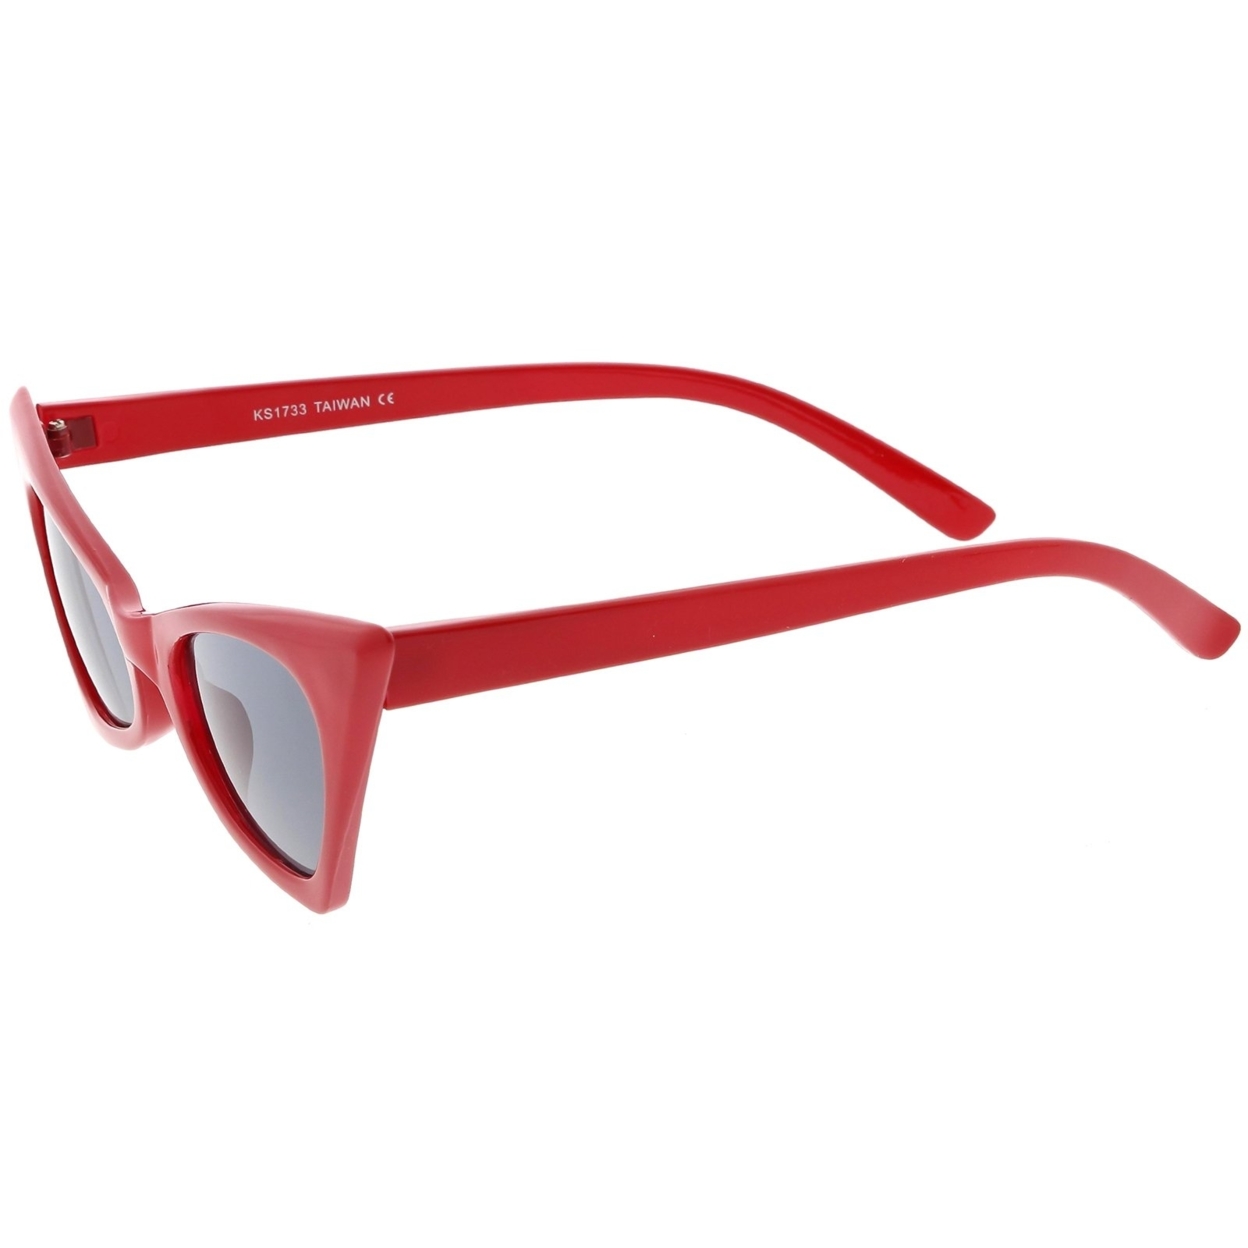 Retro Small High Pointed Sunglasses Neutral Colored Oval Lens 46mm - Red / Smoke